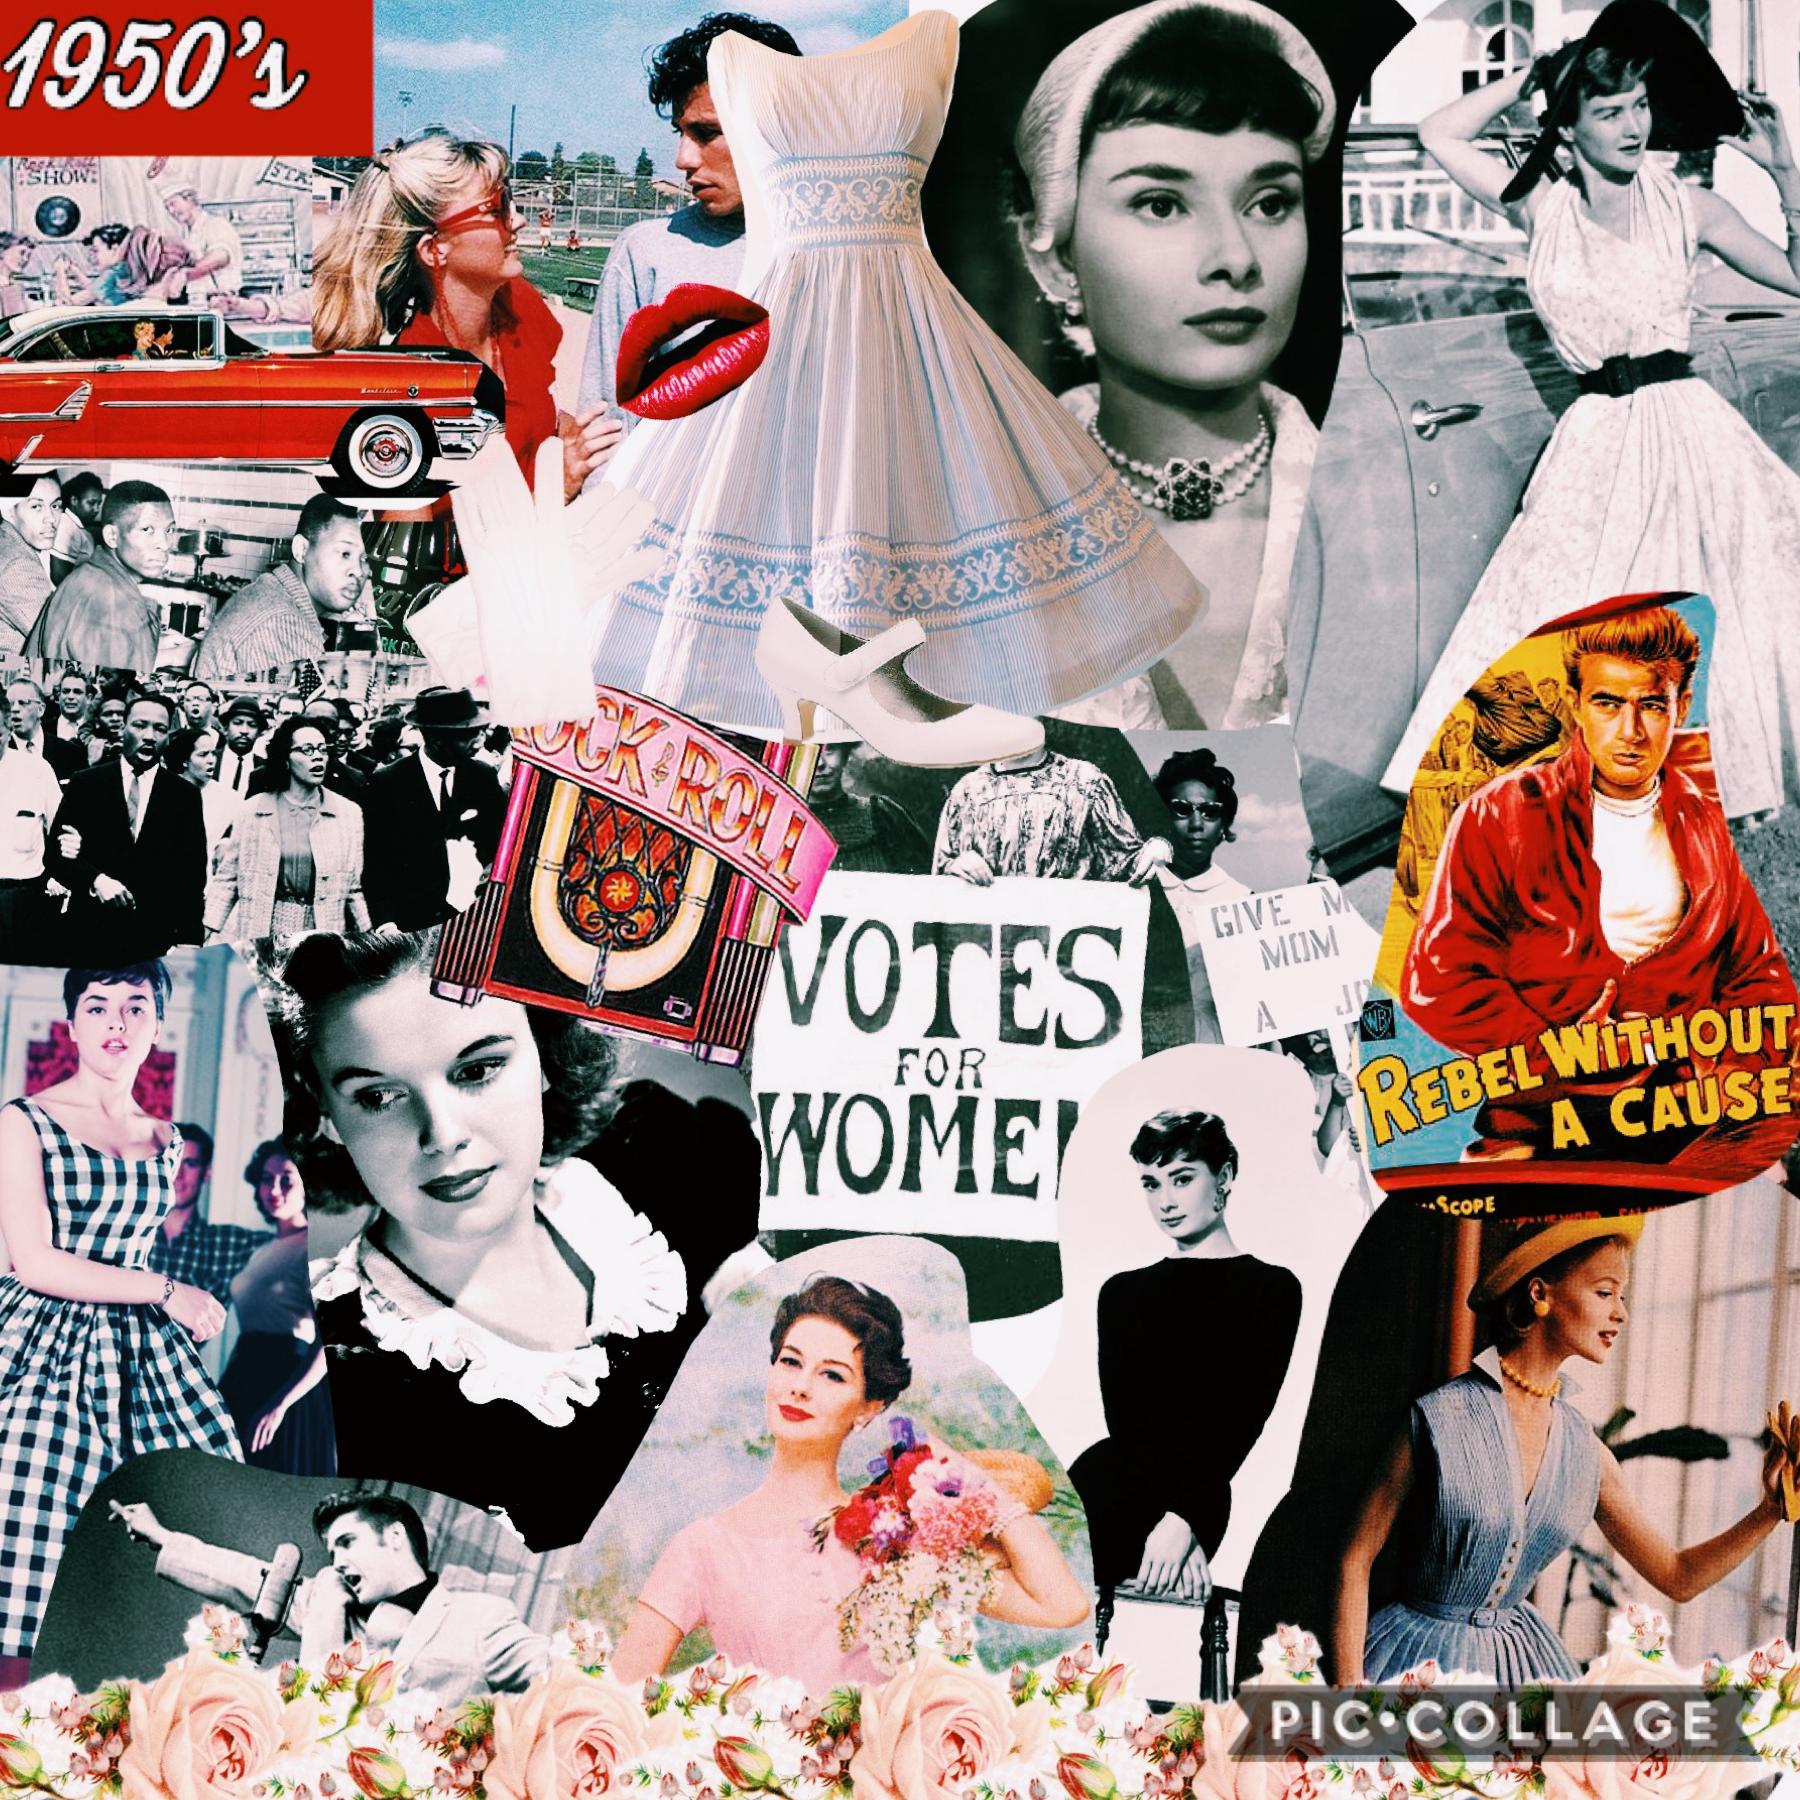 1950’s #fashion#classic#decade#iconic#outfits#audreyhepburn#judygarland#dream